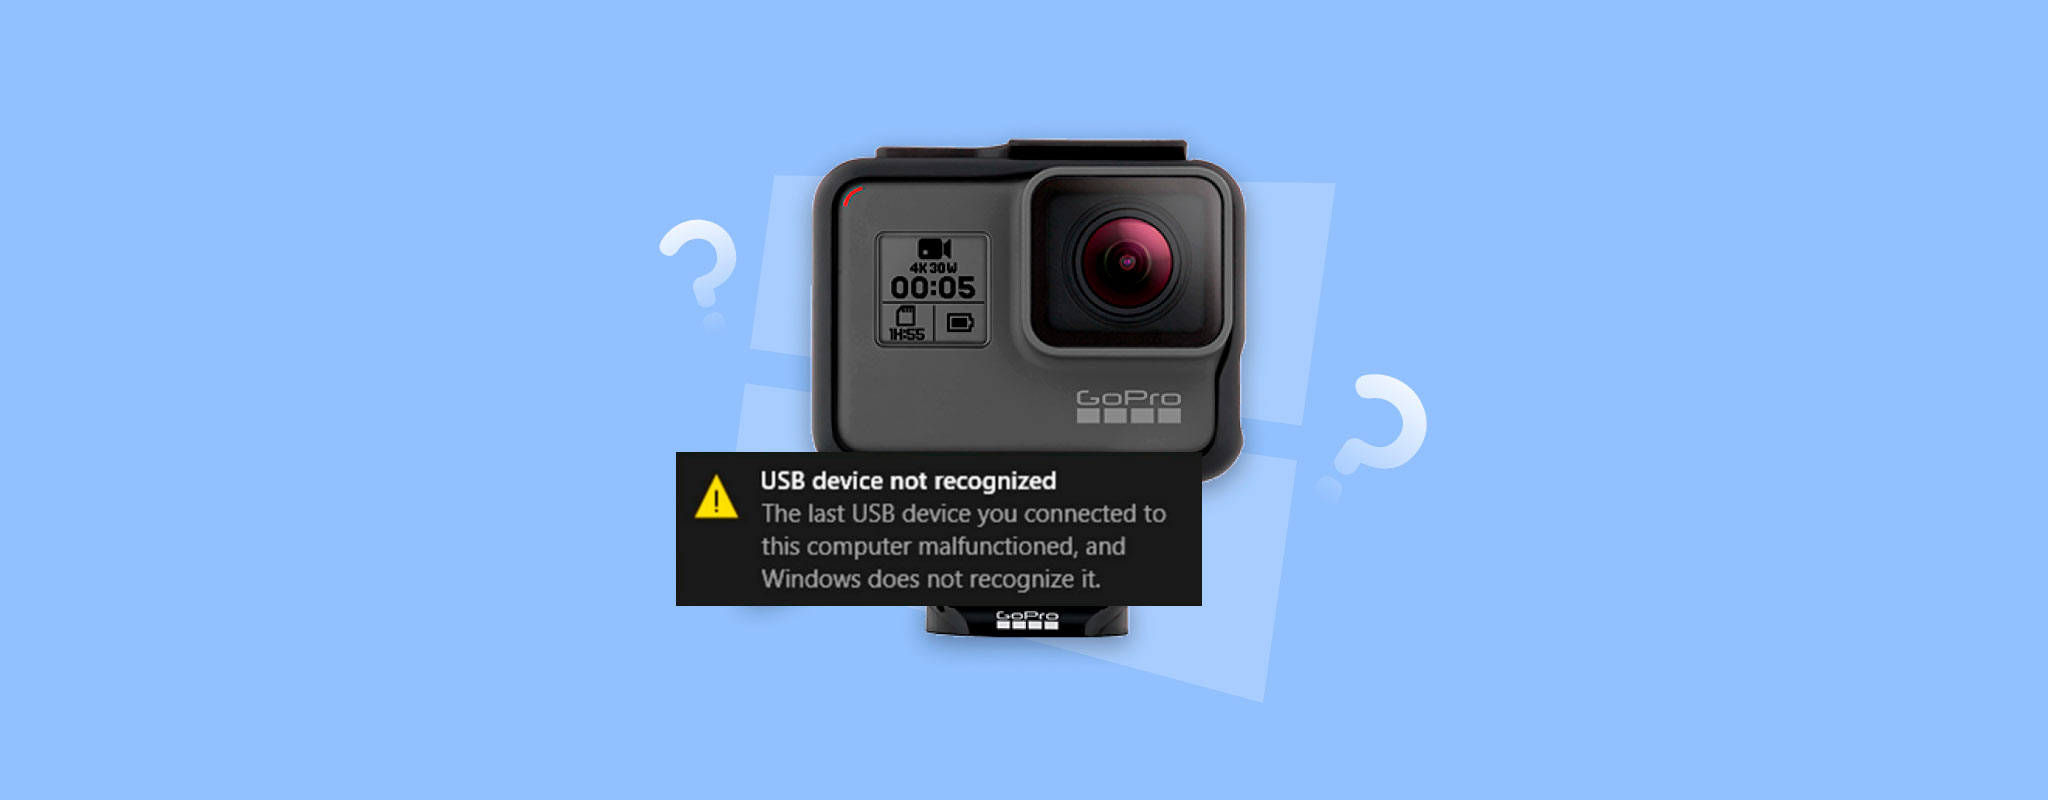 gat Aanstellen Surrey GoPro Is Not Showing Up on PC: How to Fix and Recover Files